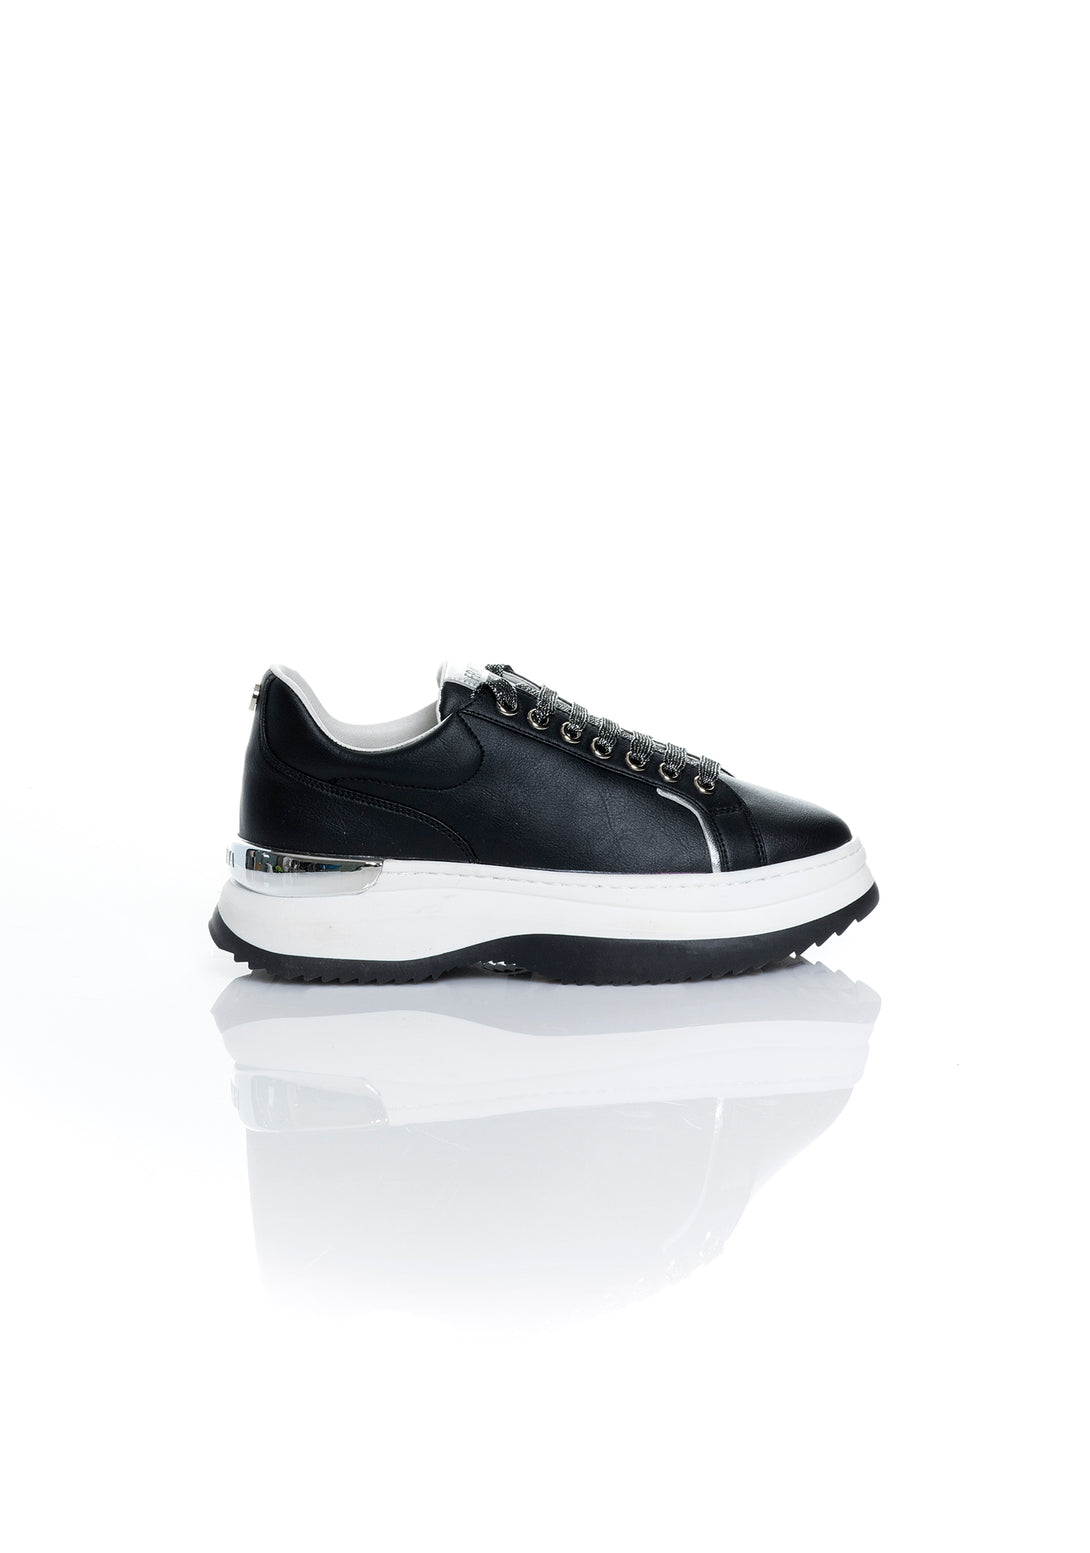 Sneakers made in leather with high sole and shoe lace Fracomina F721SS6001P41101-053